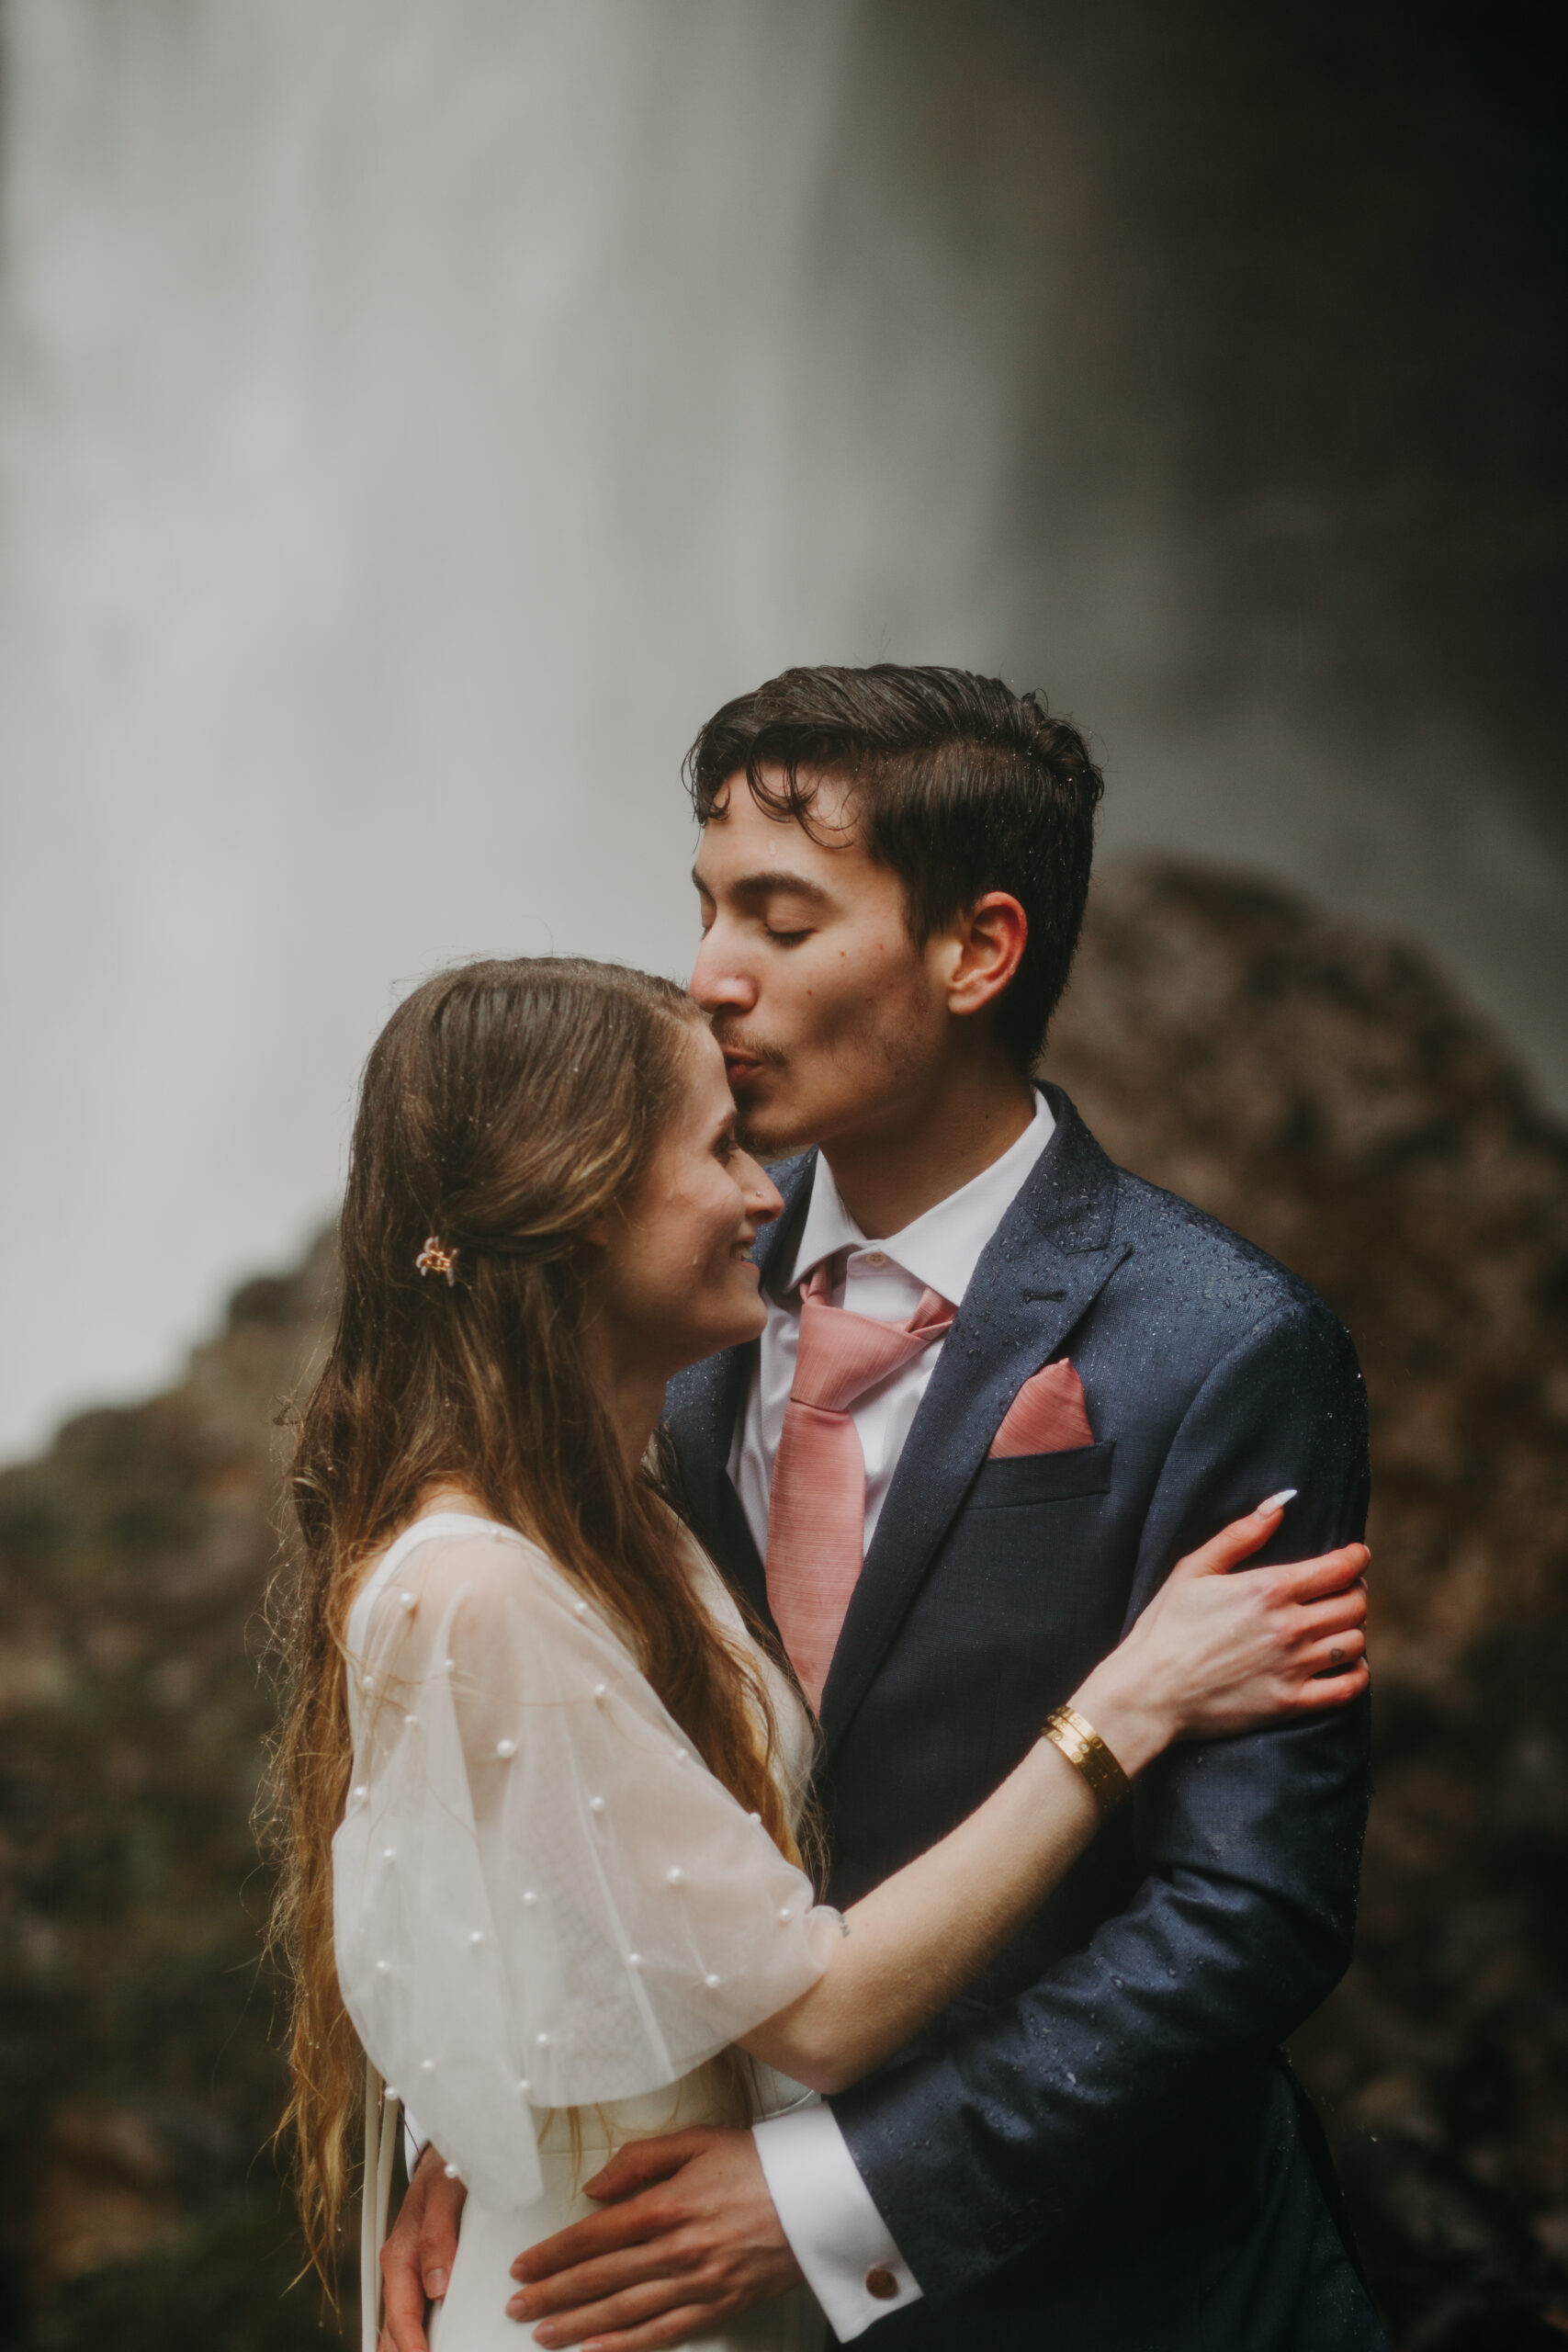 Man in blue suit with pink tie kisses woman in wedding dress on the forehead with a waterfall in the background behind them. Couples session at Columbia River Gorge's Latourell falls